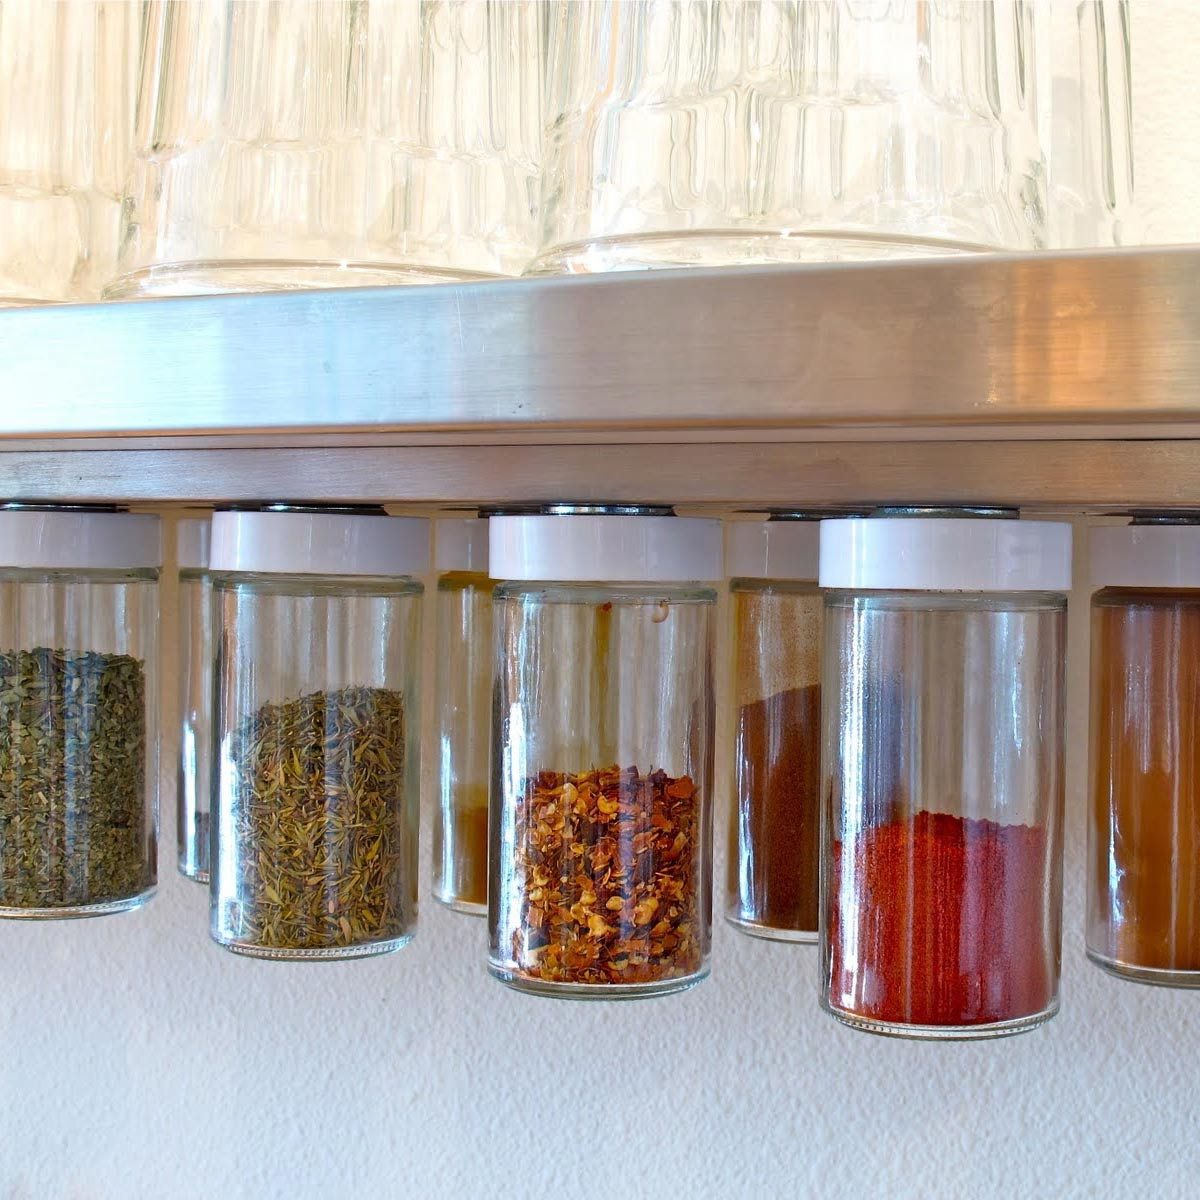 Clever ideas for how to store your spice collection